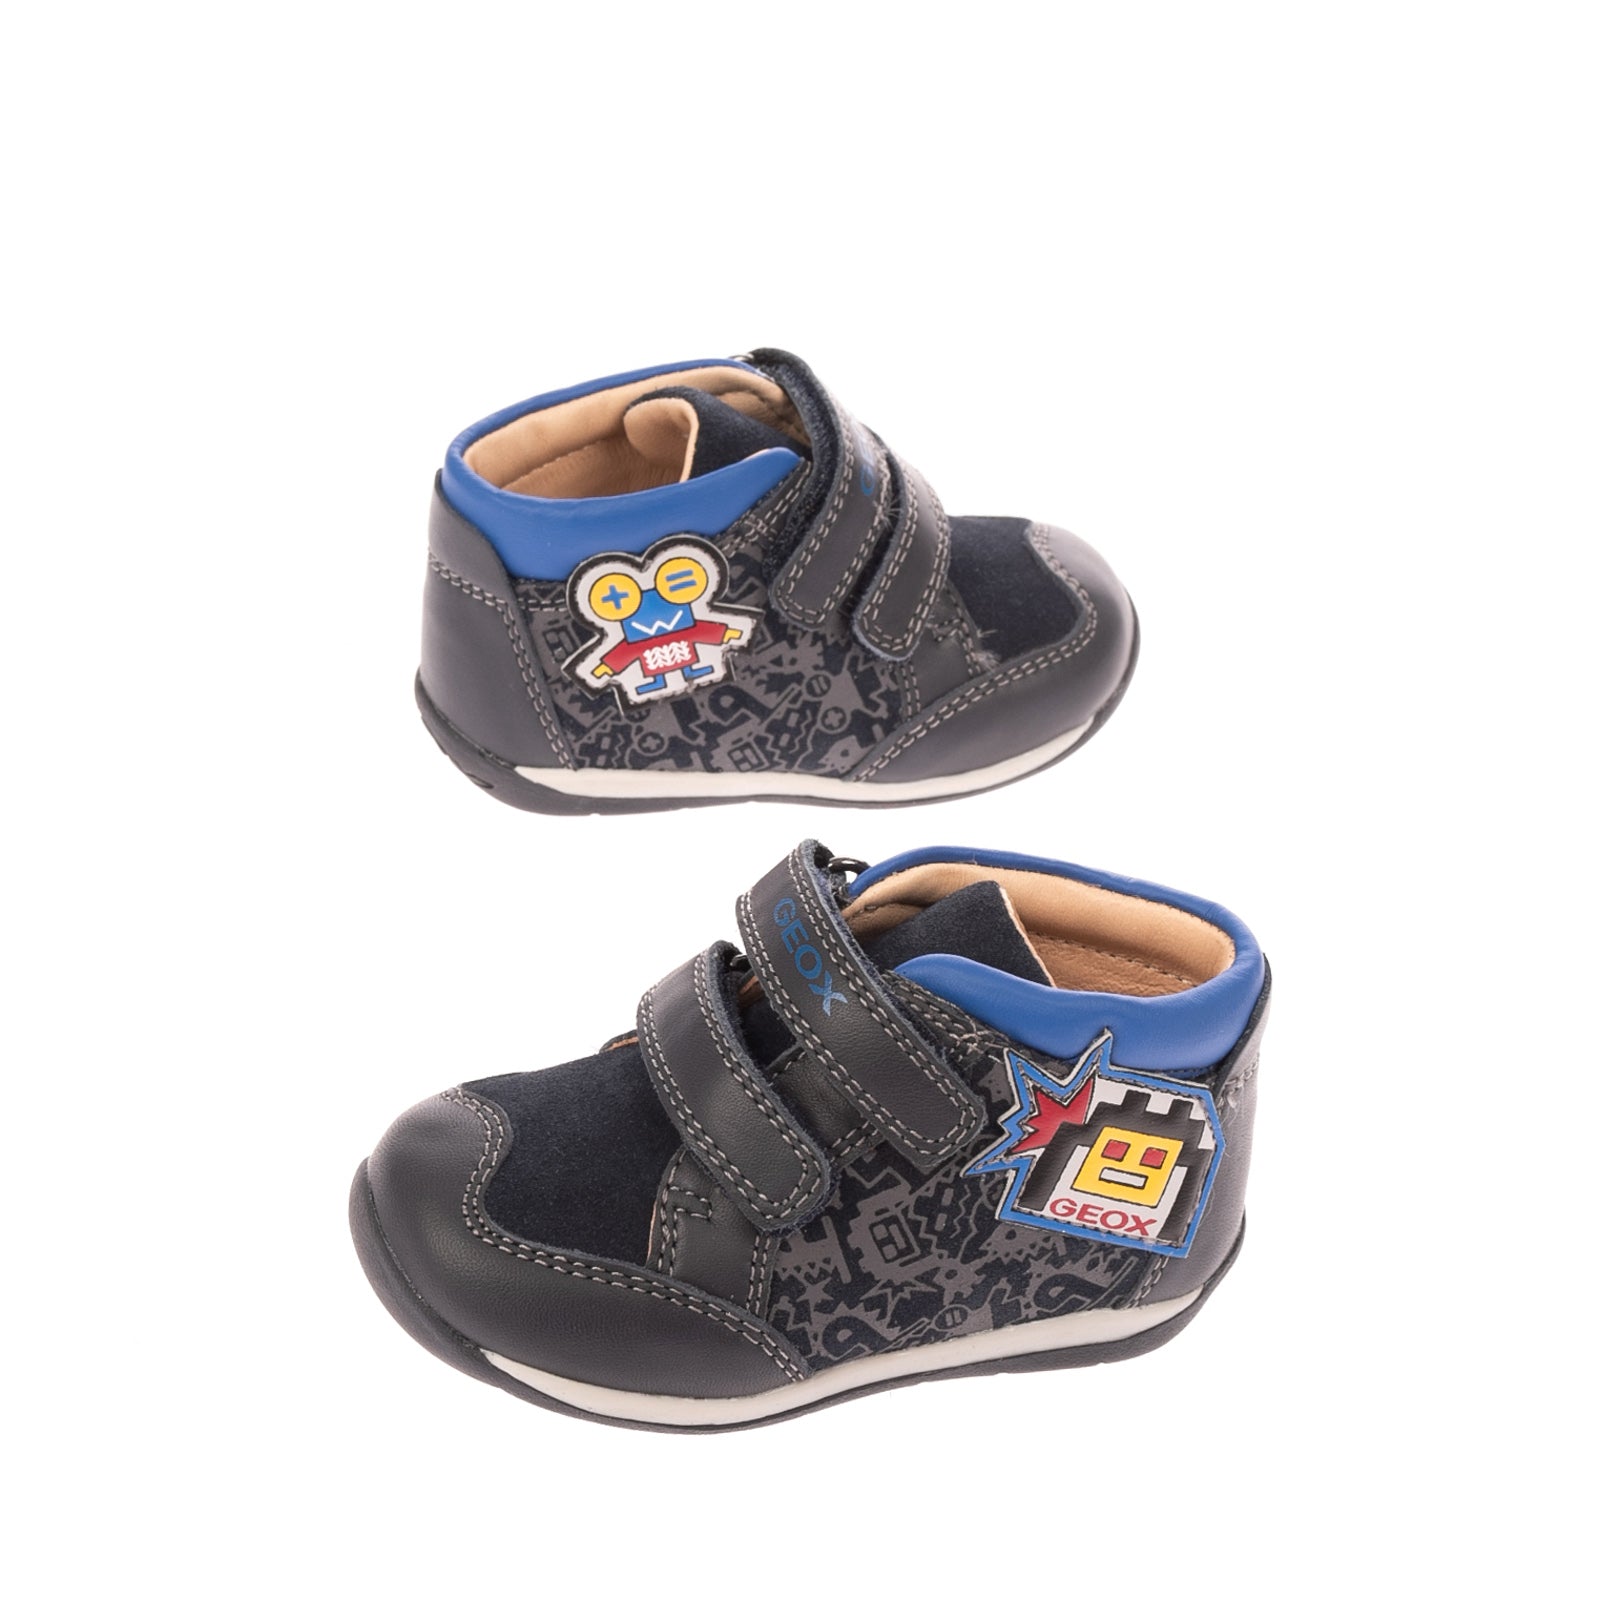 GEOX RESPIRA Baby Leather Sneakers Size 20 UK 3.5 US 4.5 Patterned Breathable gallery main photo